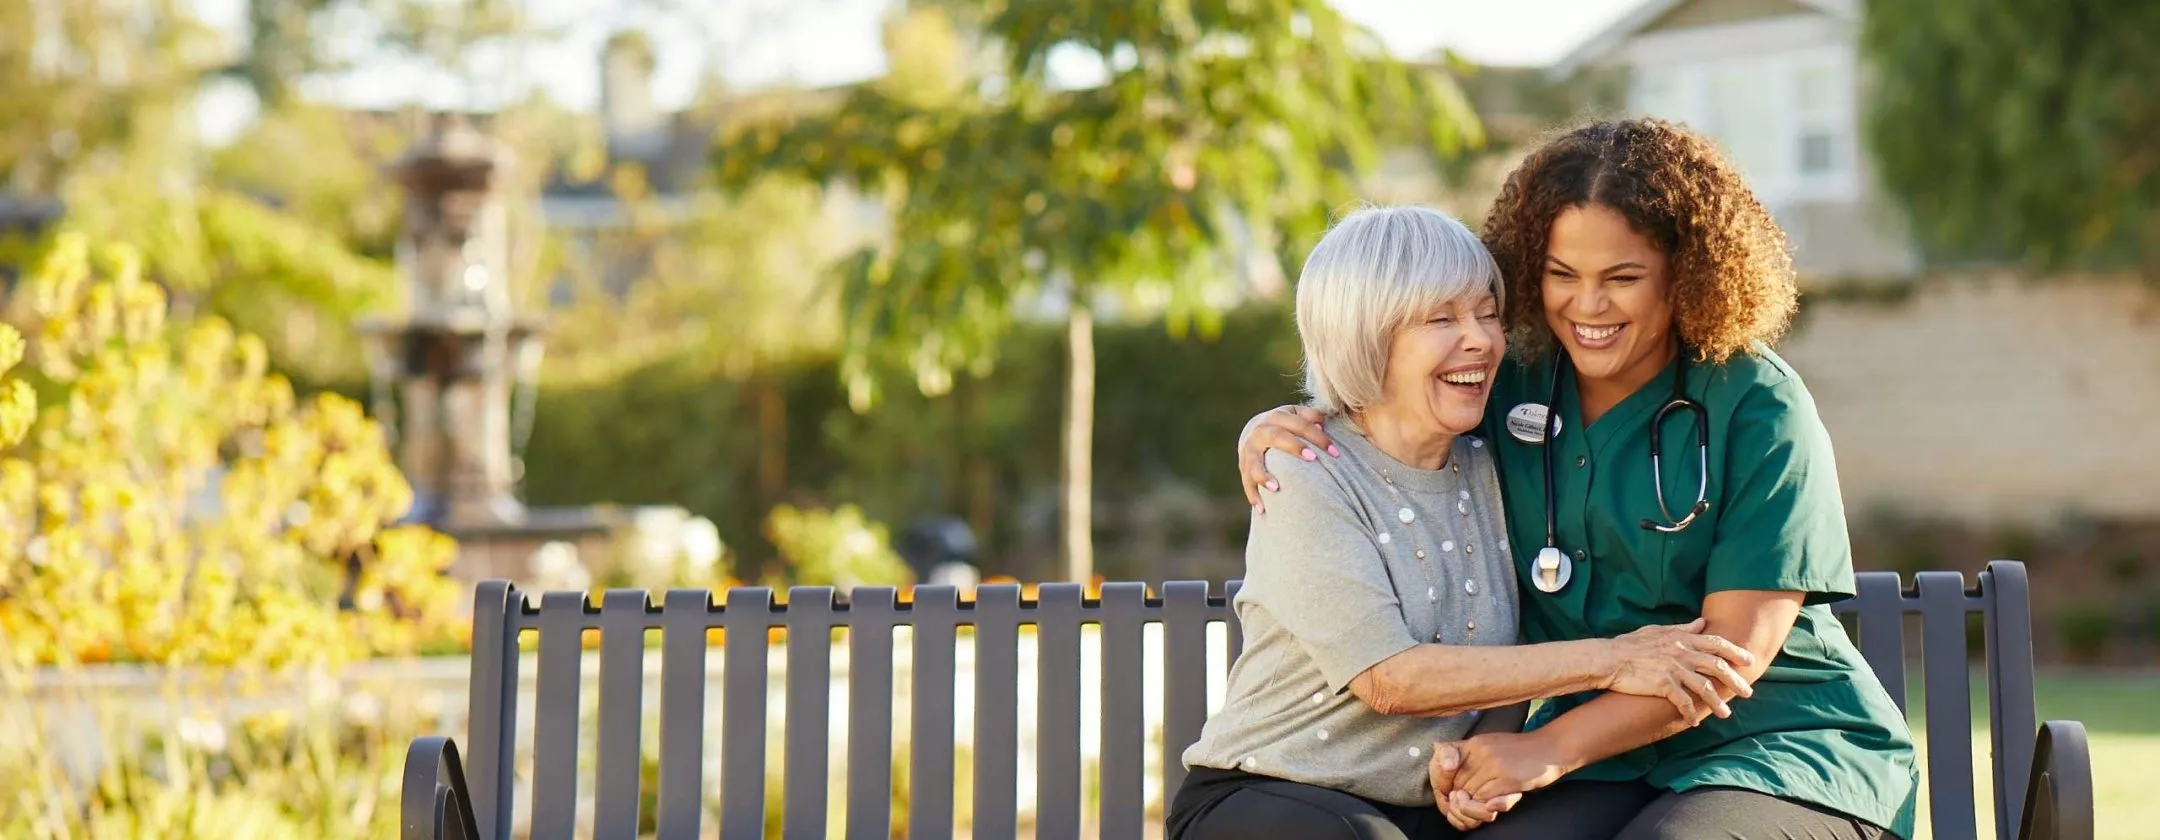 Caregiver is laughing with a senior lady on a bench